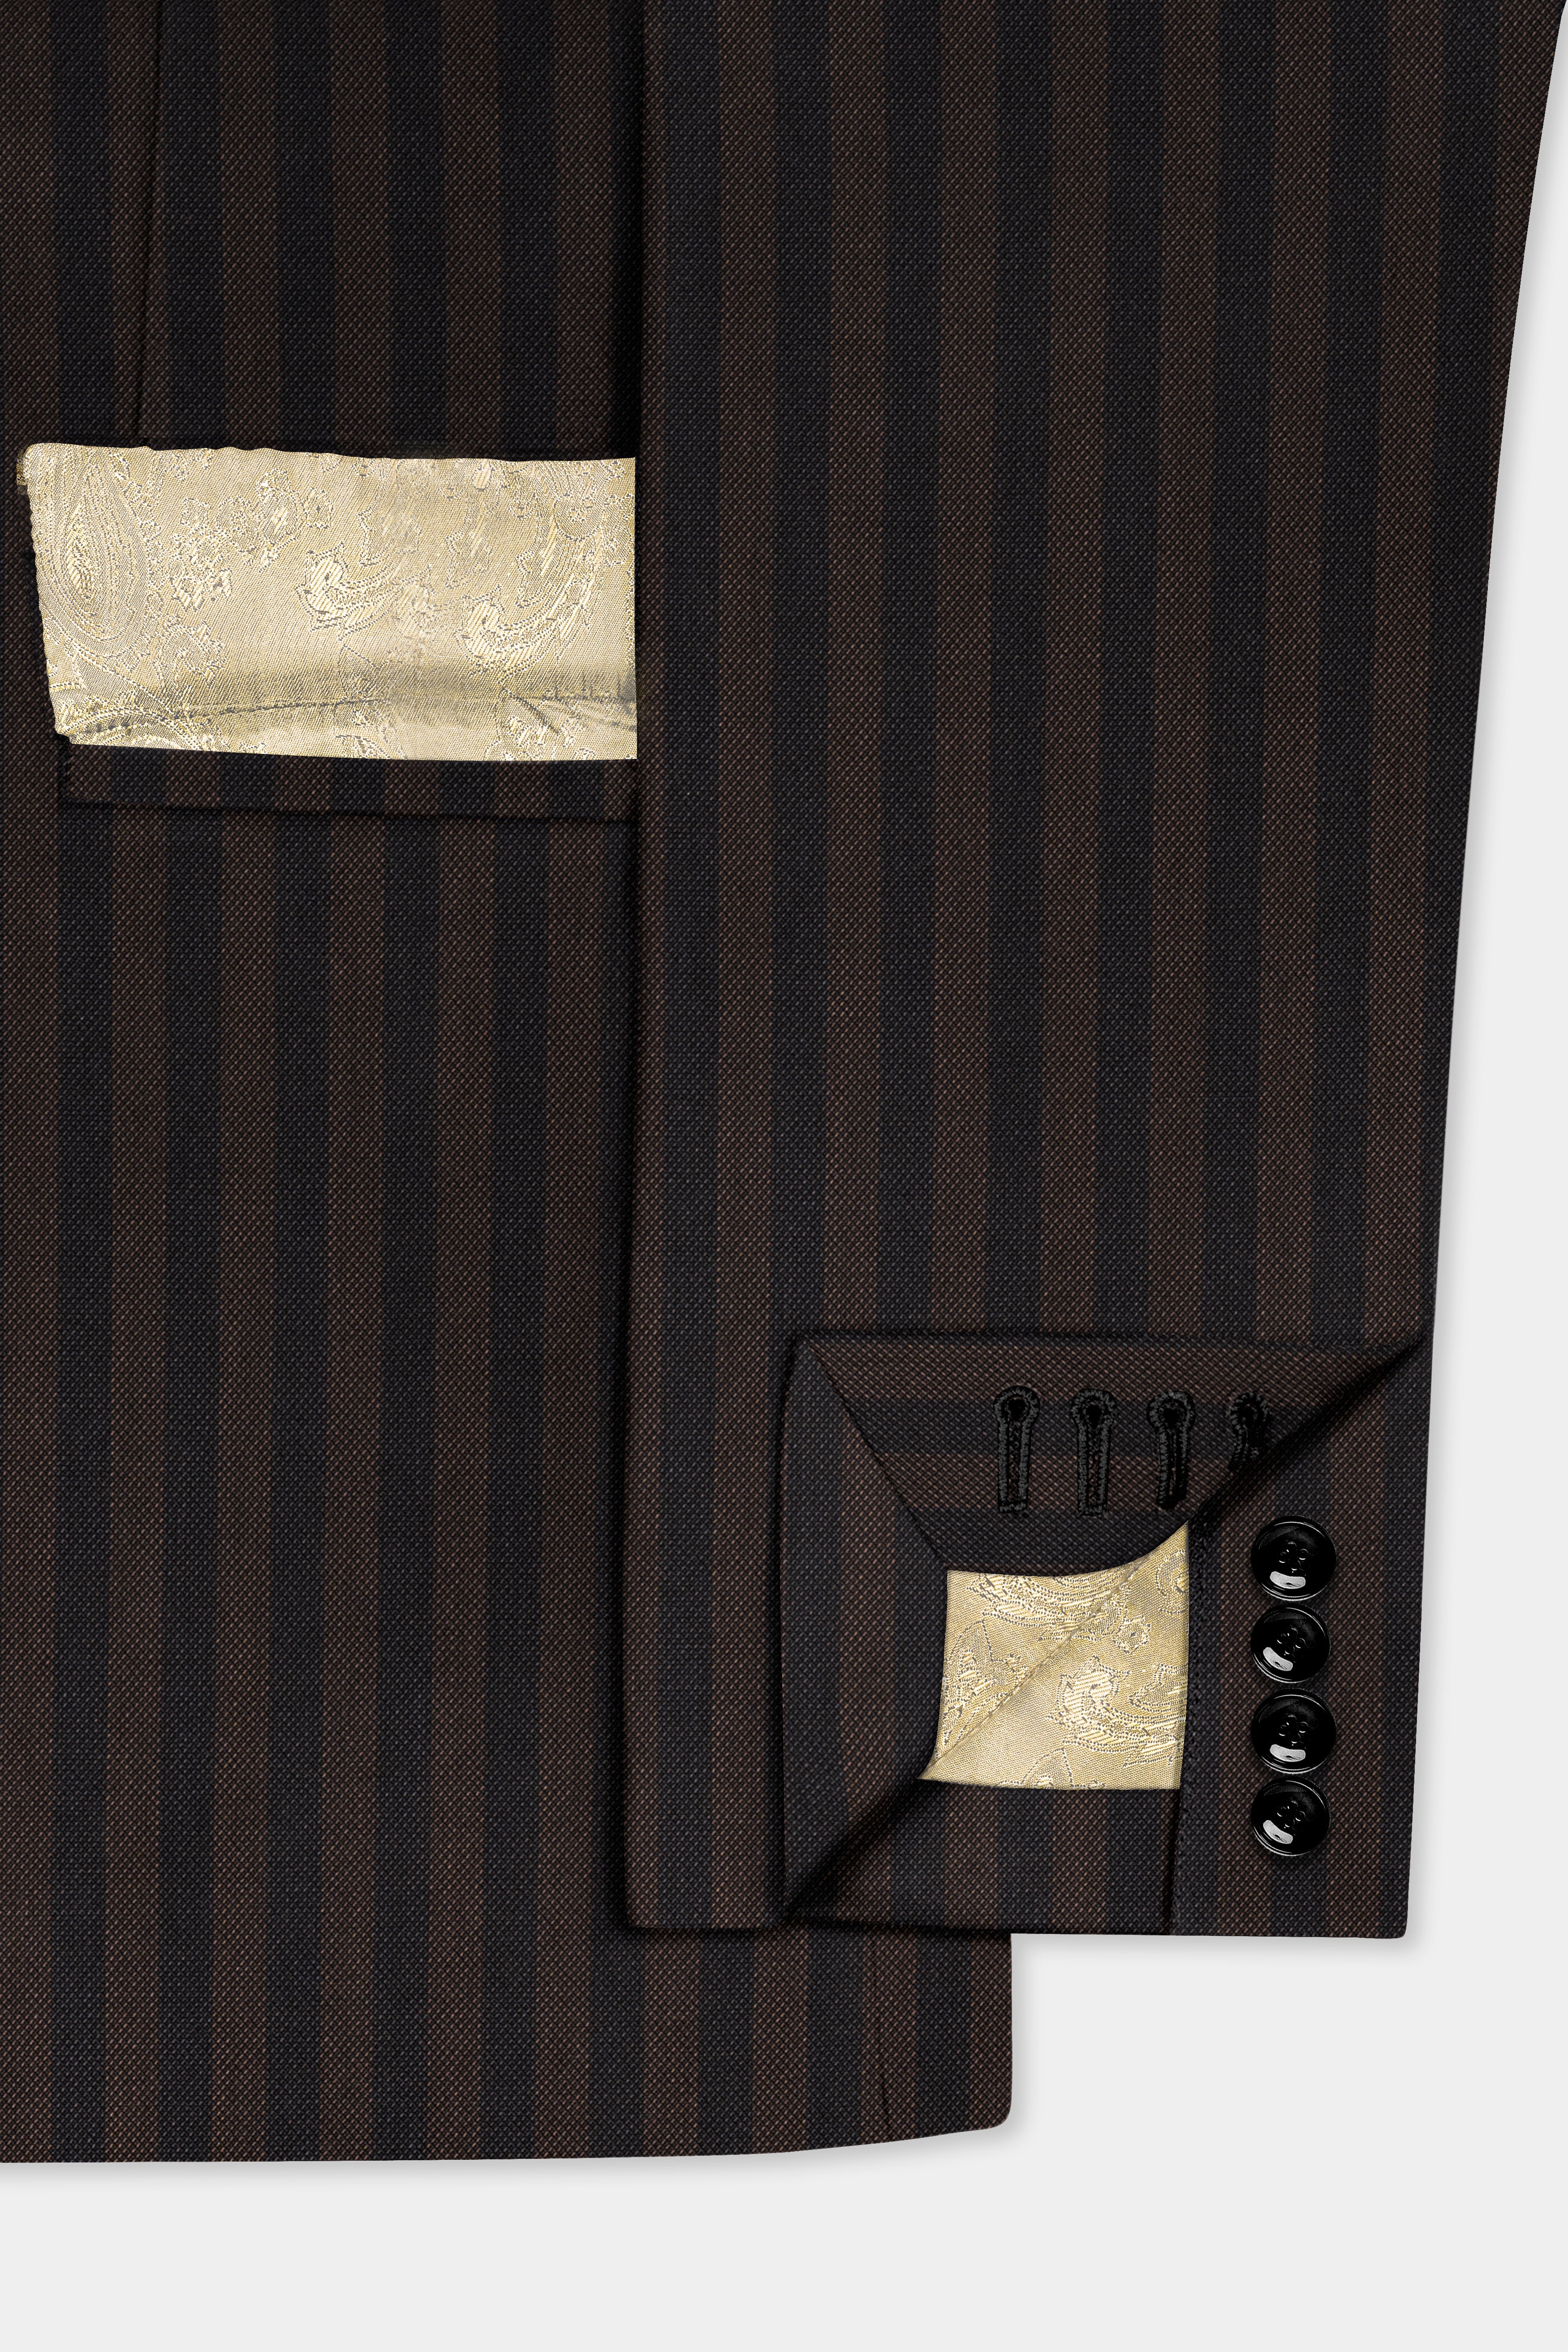 Eternity Brown With Vulcan Black Striped Wool Blend Single Breasted Suit